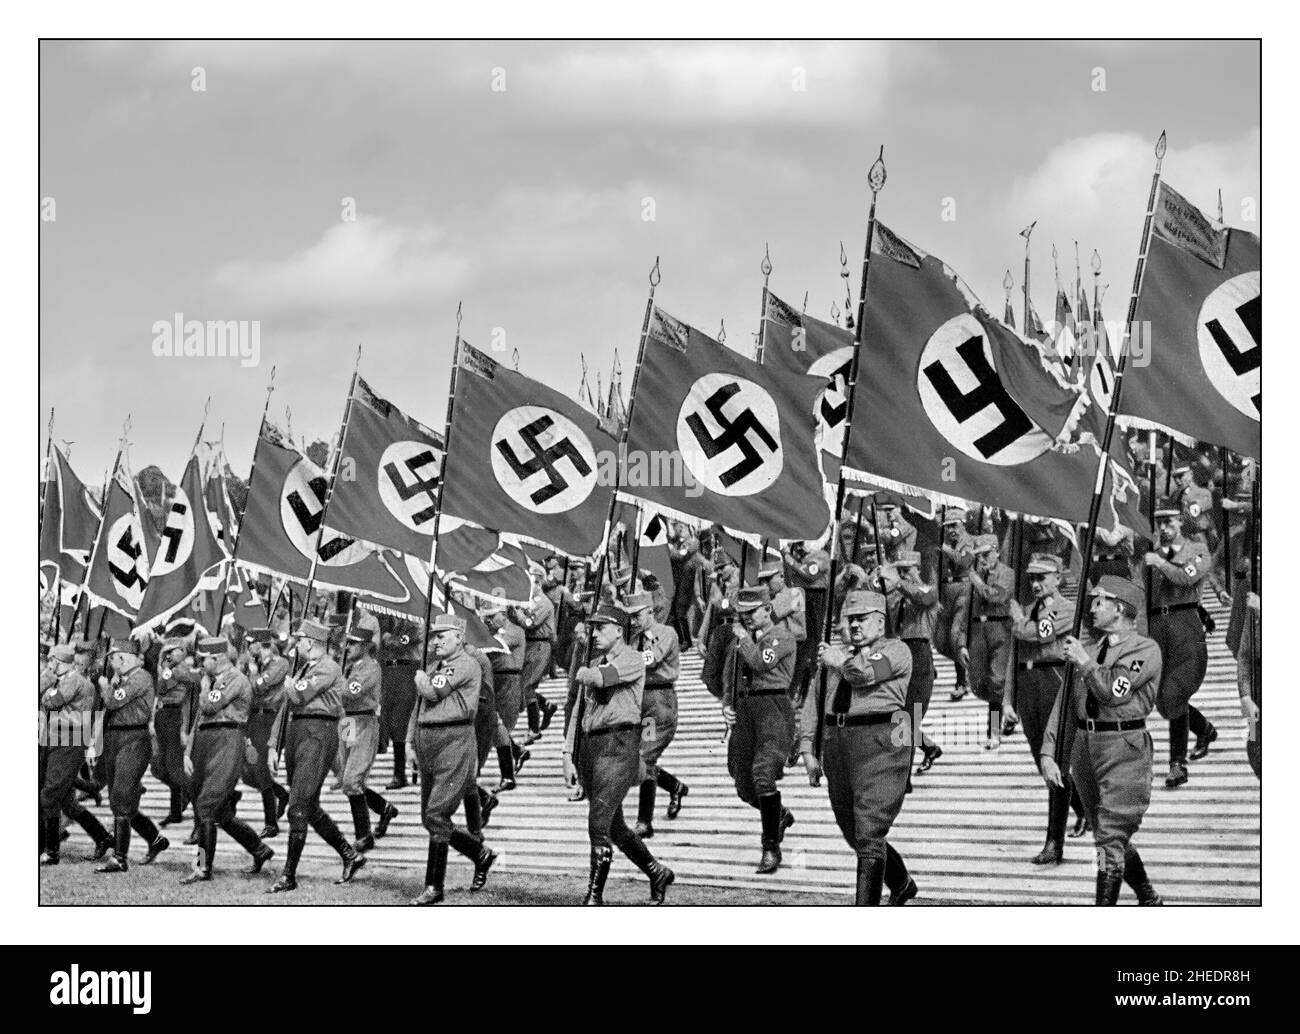 The Sturmabteilung, or SA, a paramilitary organization associated with the Nazi Party. S.A. stormtroopers, or 'brownshirts', in Nuremberg Germany, swastika flag bearers at the Nazis’ Party Day in Nuremberg , 1933. The Sturmabteilung was the Nazi Party's original paramilitary wing. It played a significant role in Adolf Hitler's rise to power in the 1920s and 1930s. Stock Photo